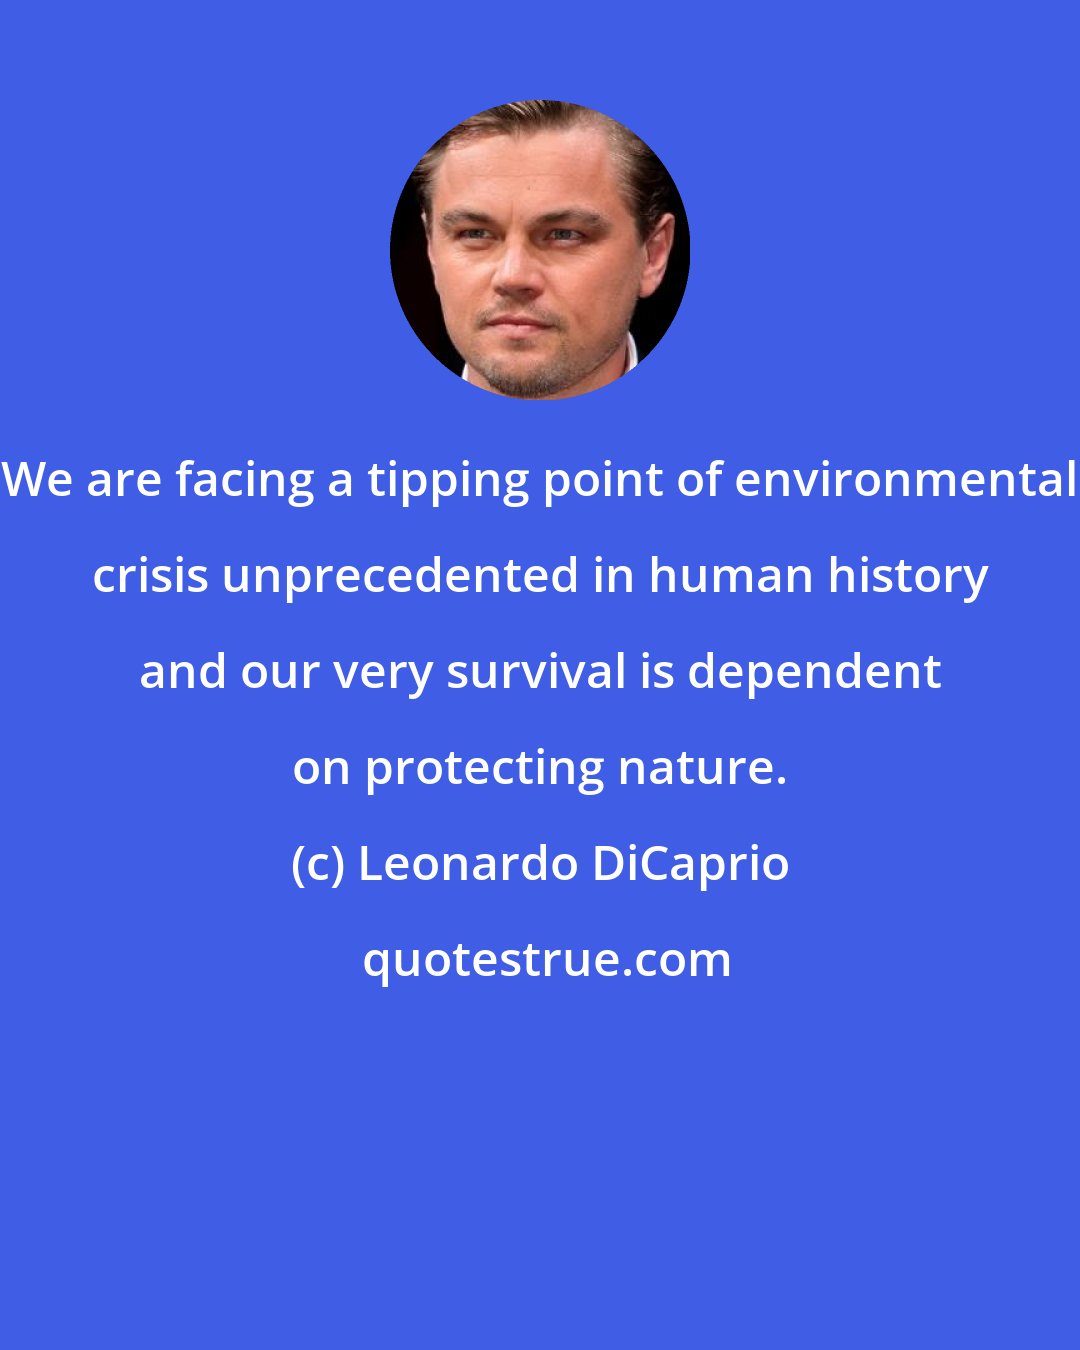 Leonardo DiCaprio: We are facing a tipping point of environmental crisis unprecedented in human history and our very survival is dependent on protecting nature.